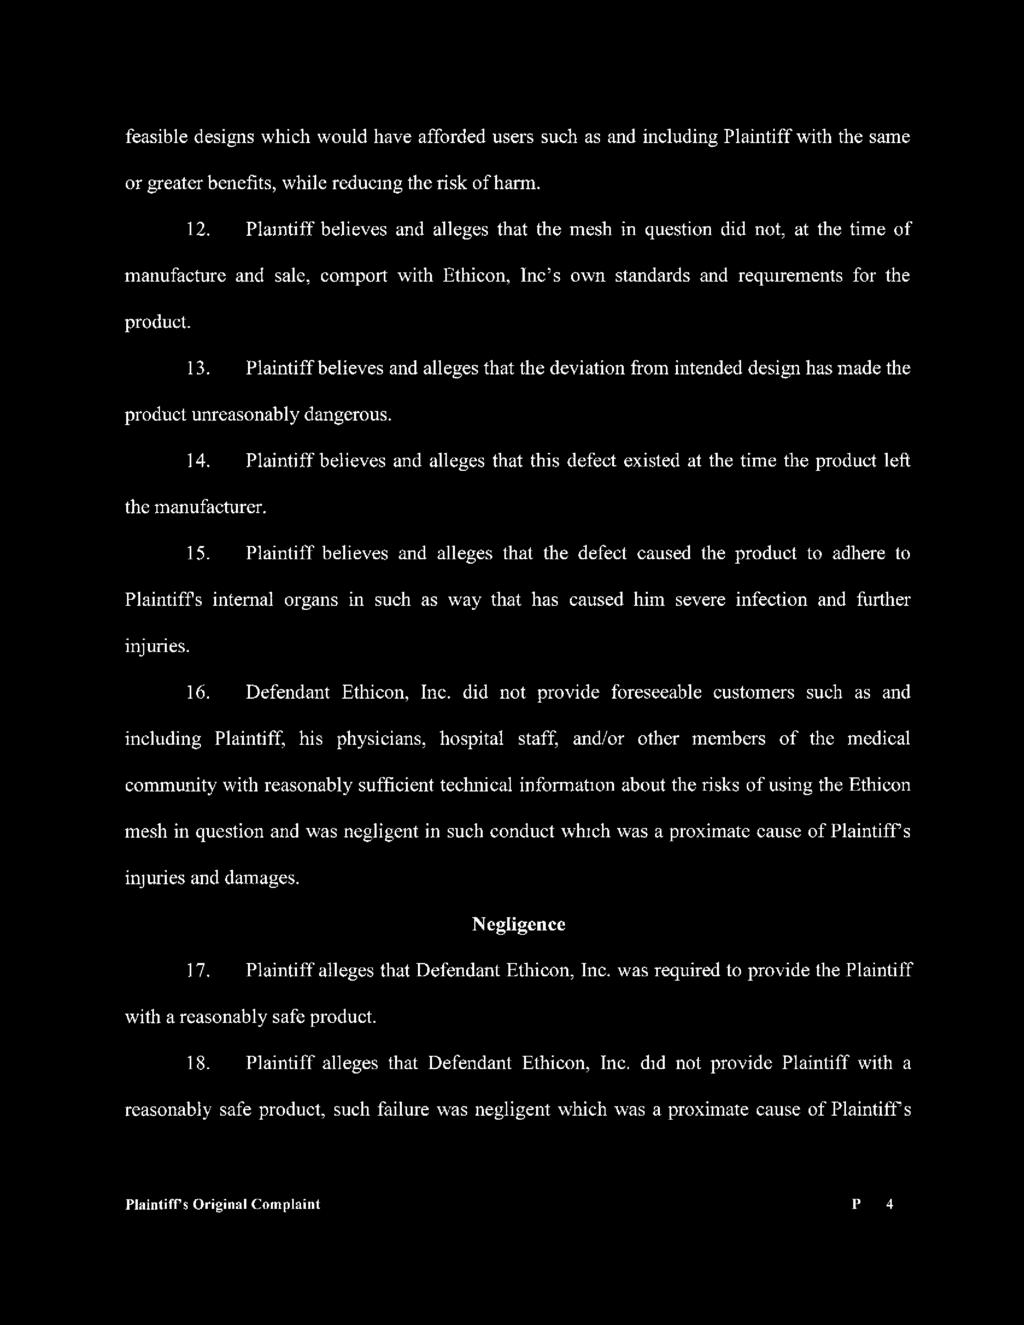 Case 3:16-cv-00368-JPG-PMF Document 1 Filed 04/01/16 Page 4 of 7 Page ID #4 feasible designs which would have afforded users such as and including Plaintiff with the same or greater benefits, while